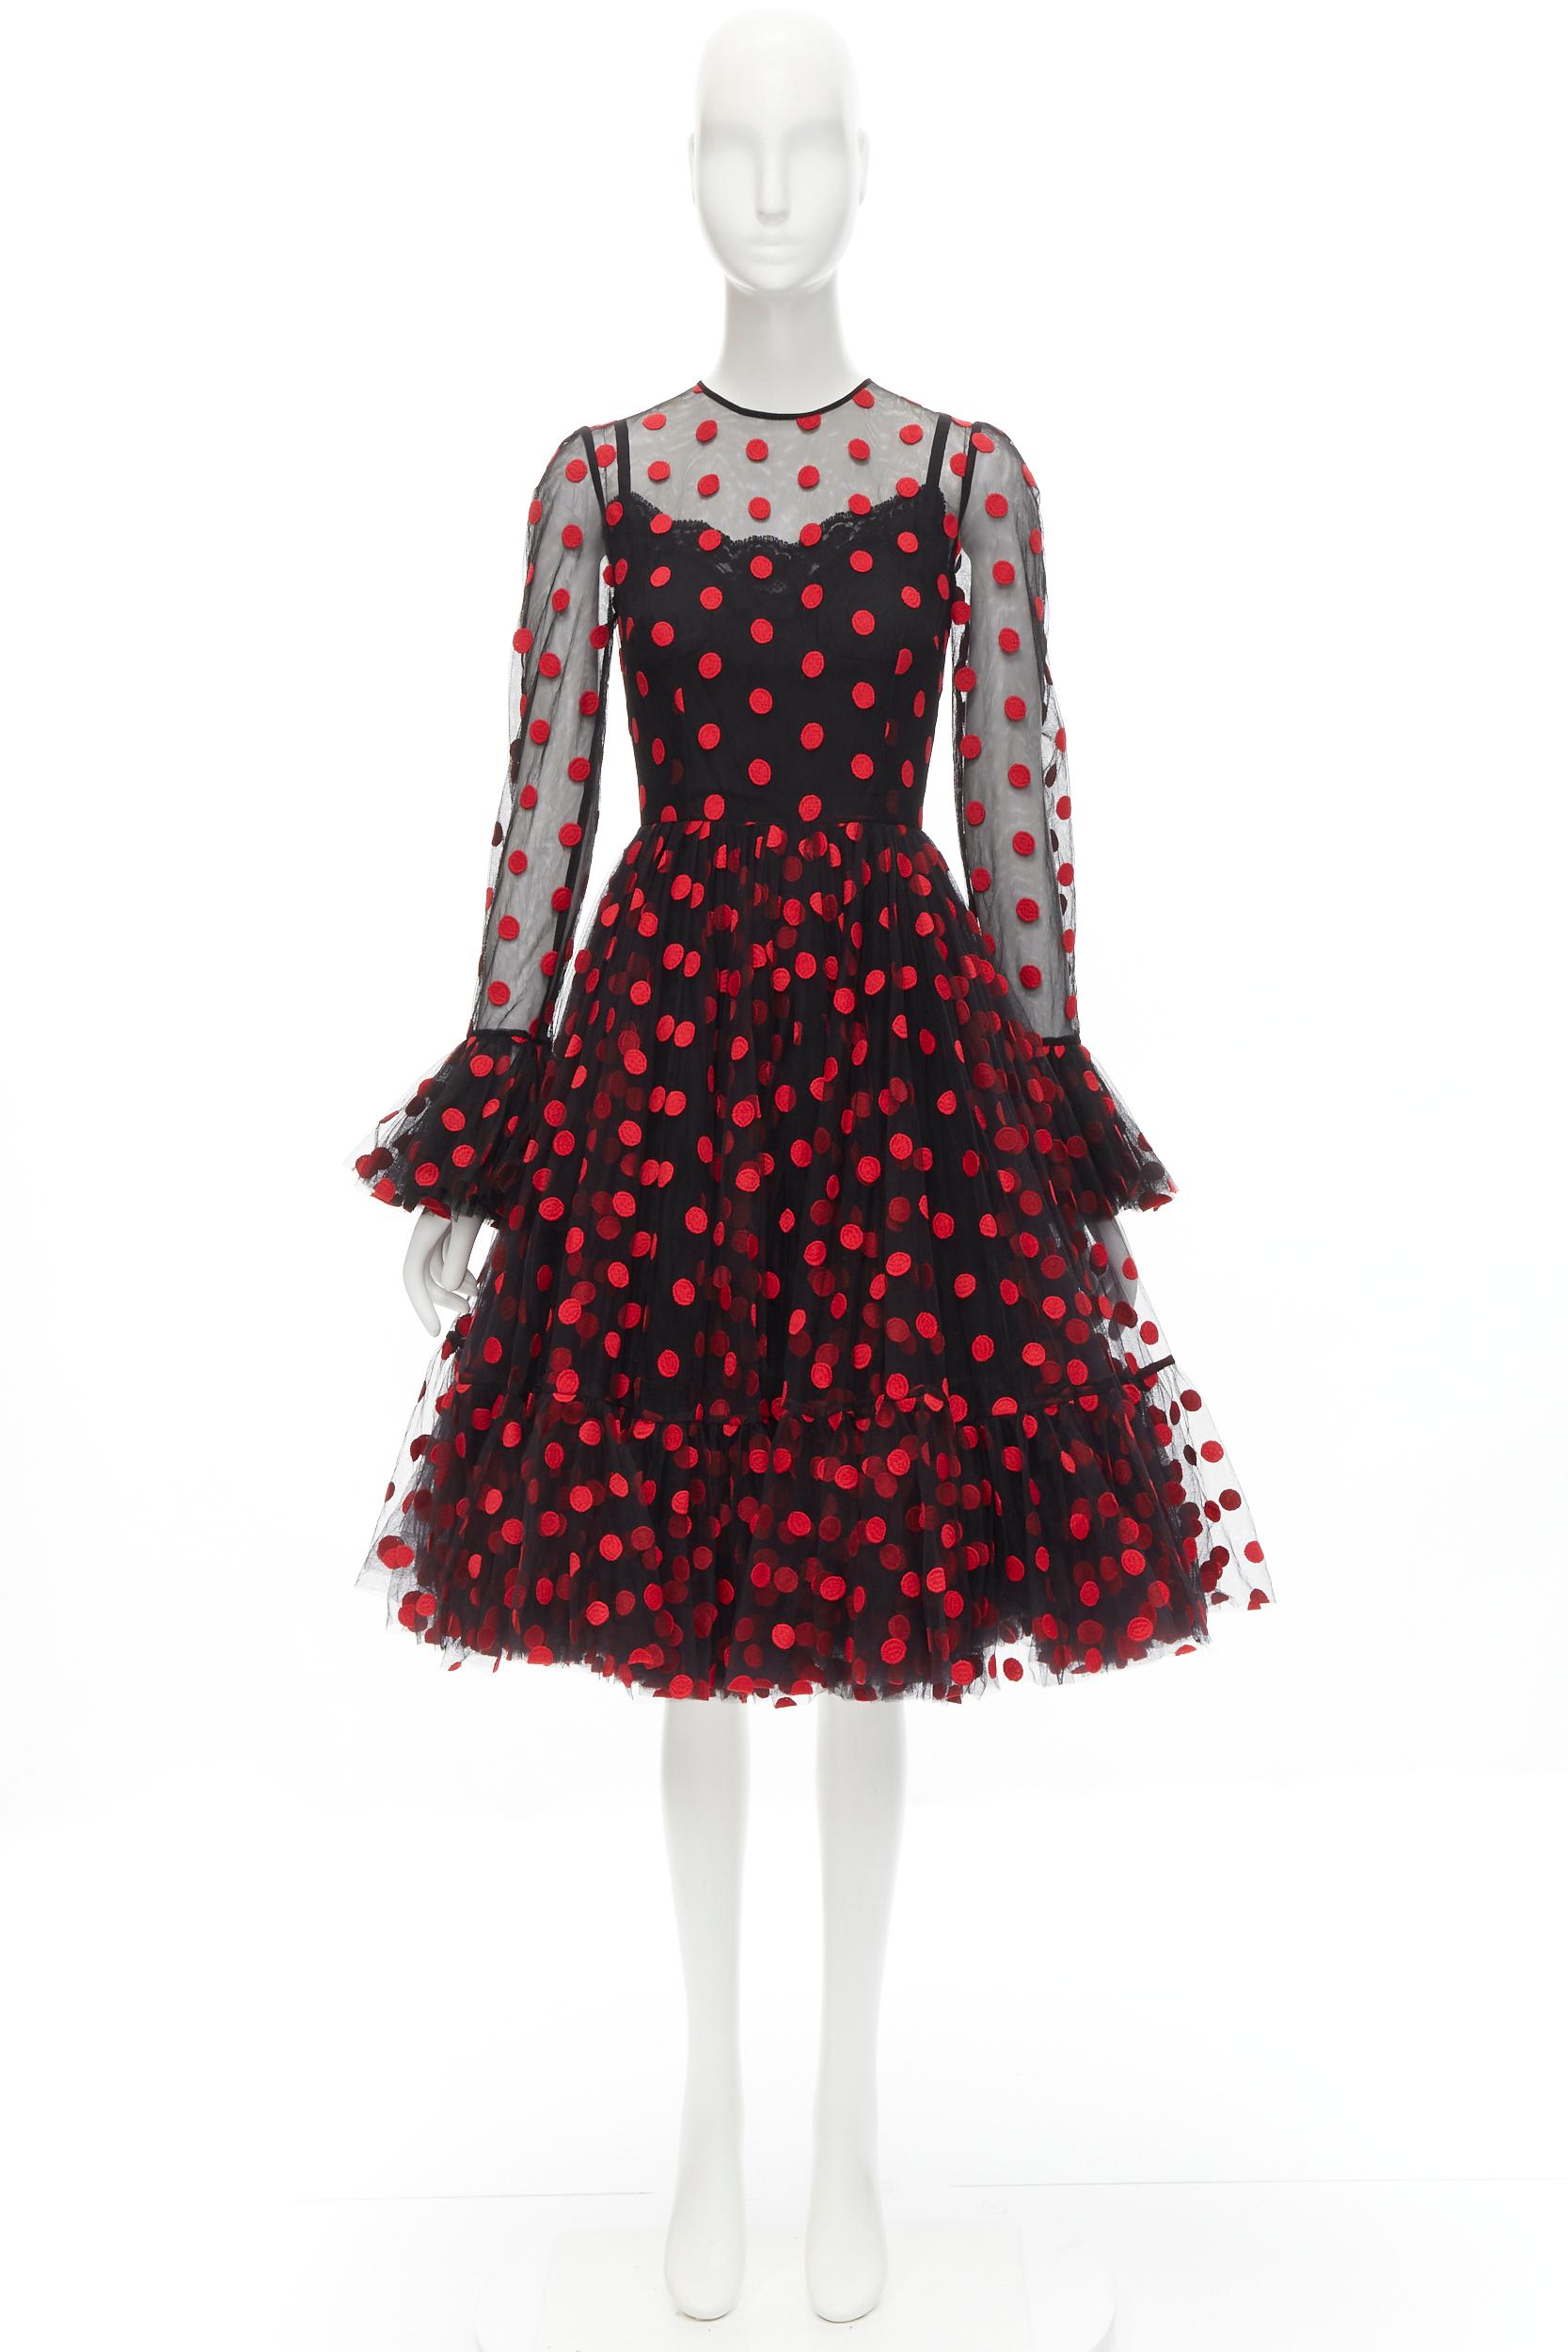 DOLCE GABBANA black red polka dot embroidered tulle flared dress IT40 S For Sale 2